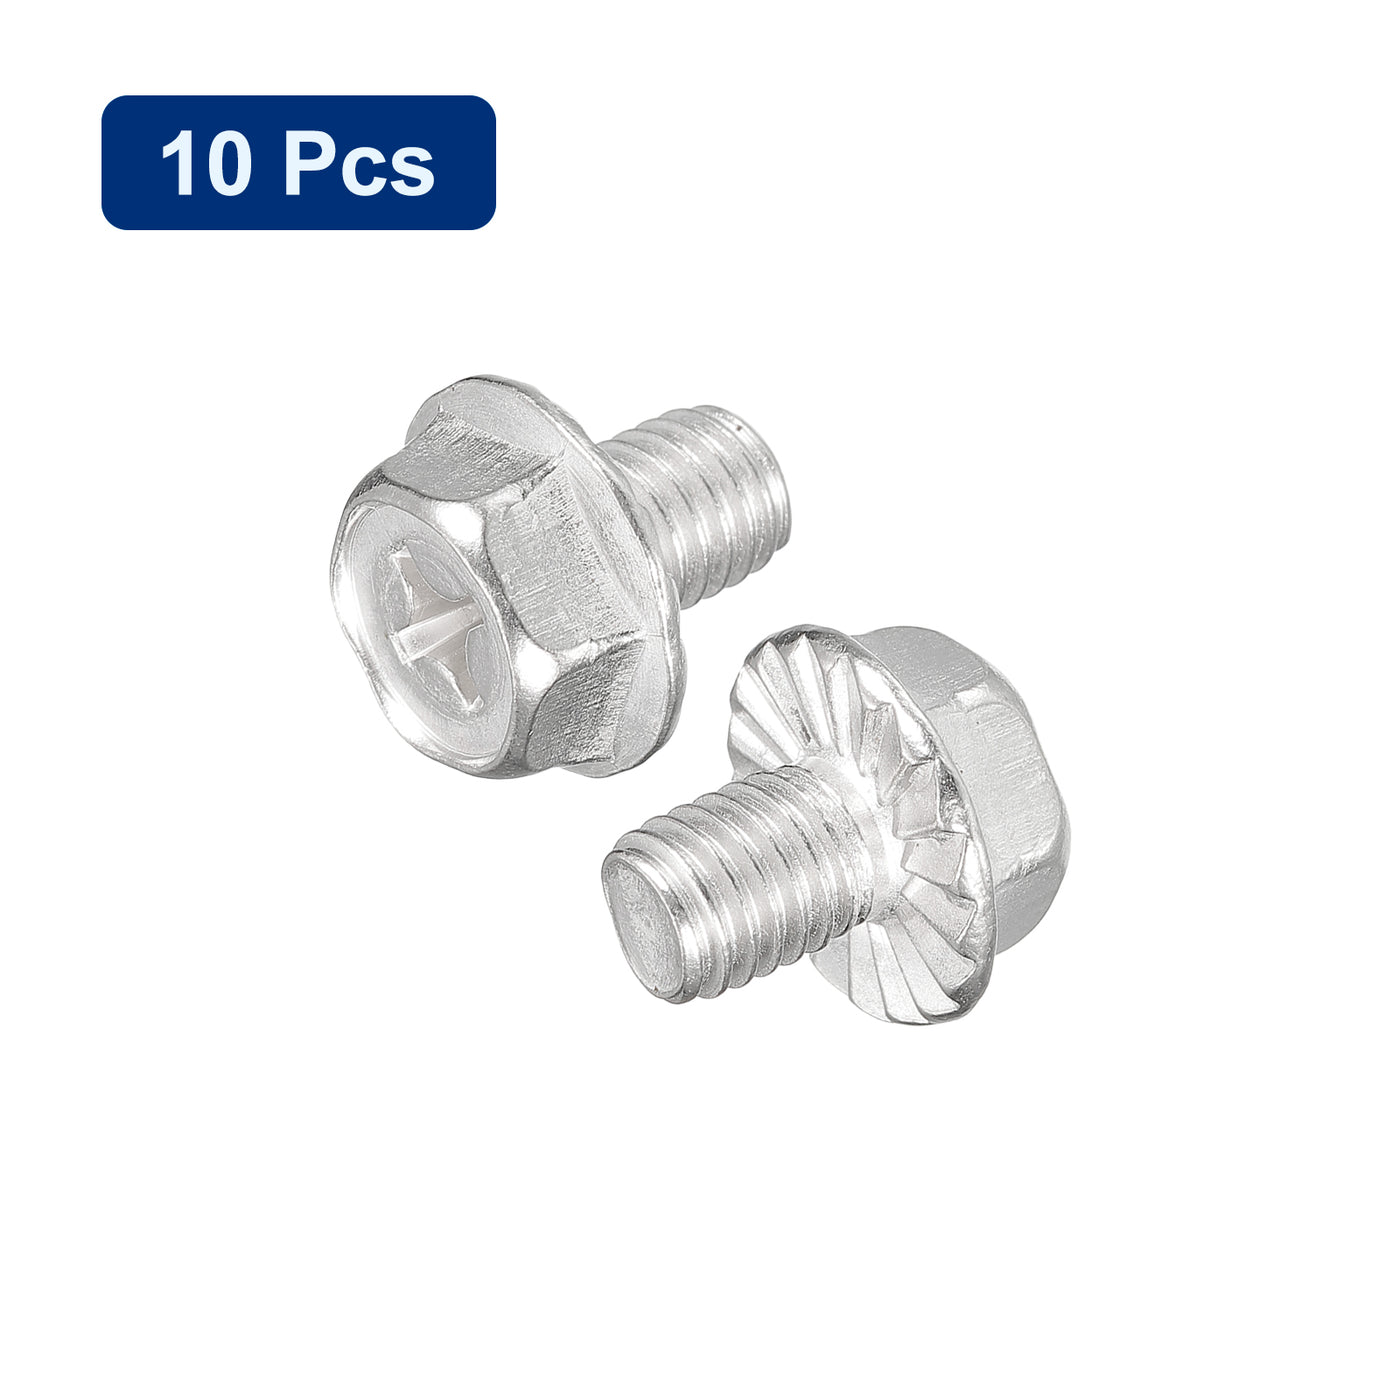 uxcell Uxcell M8x10mm Phillips Hex Head Flange Bolts, 10pcs 304 Stainless Steel Screws